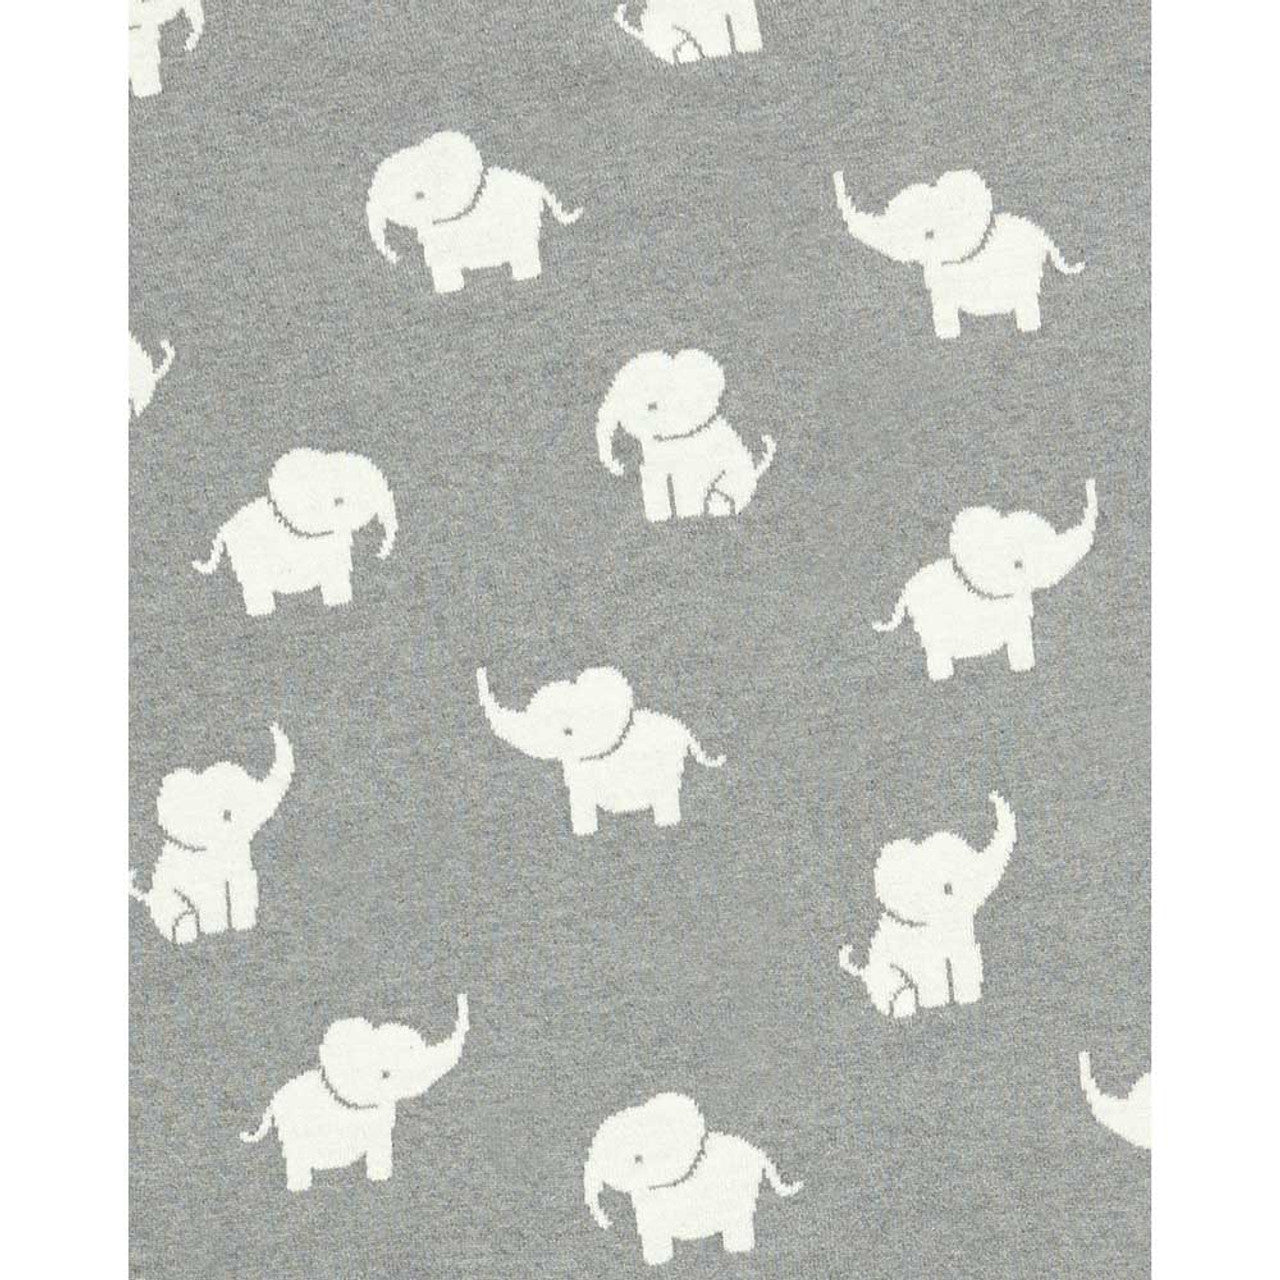 Mamas & Papas Welcome To The World Knitted Elephant Blanket - Grey